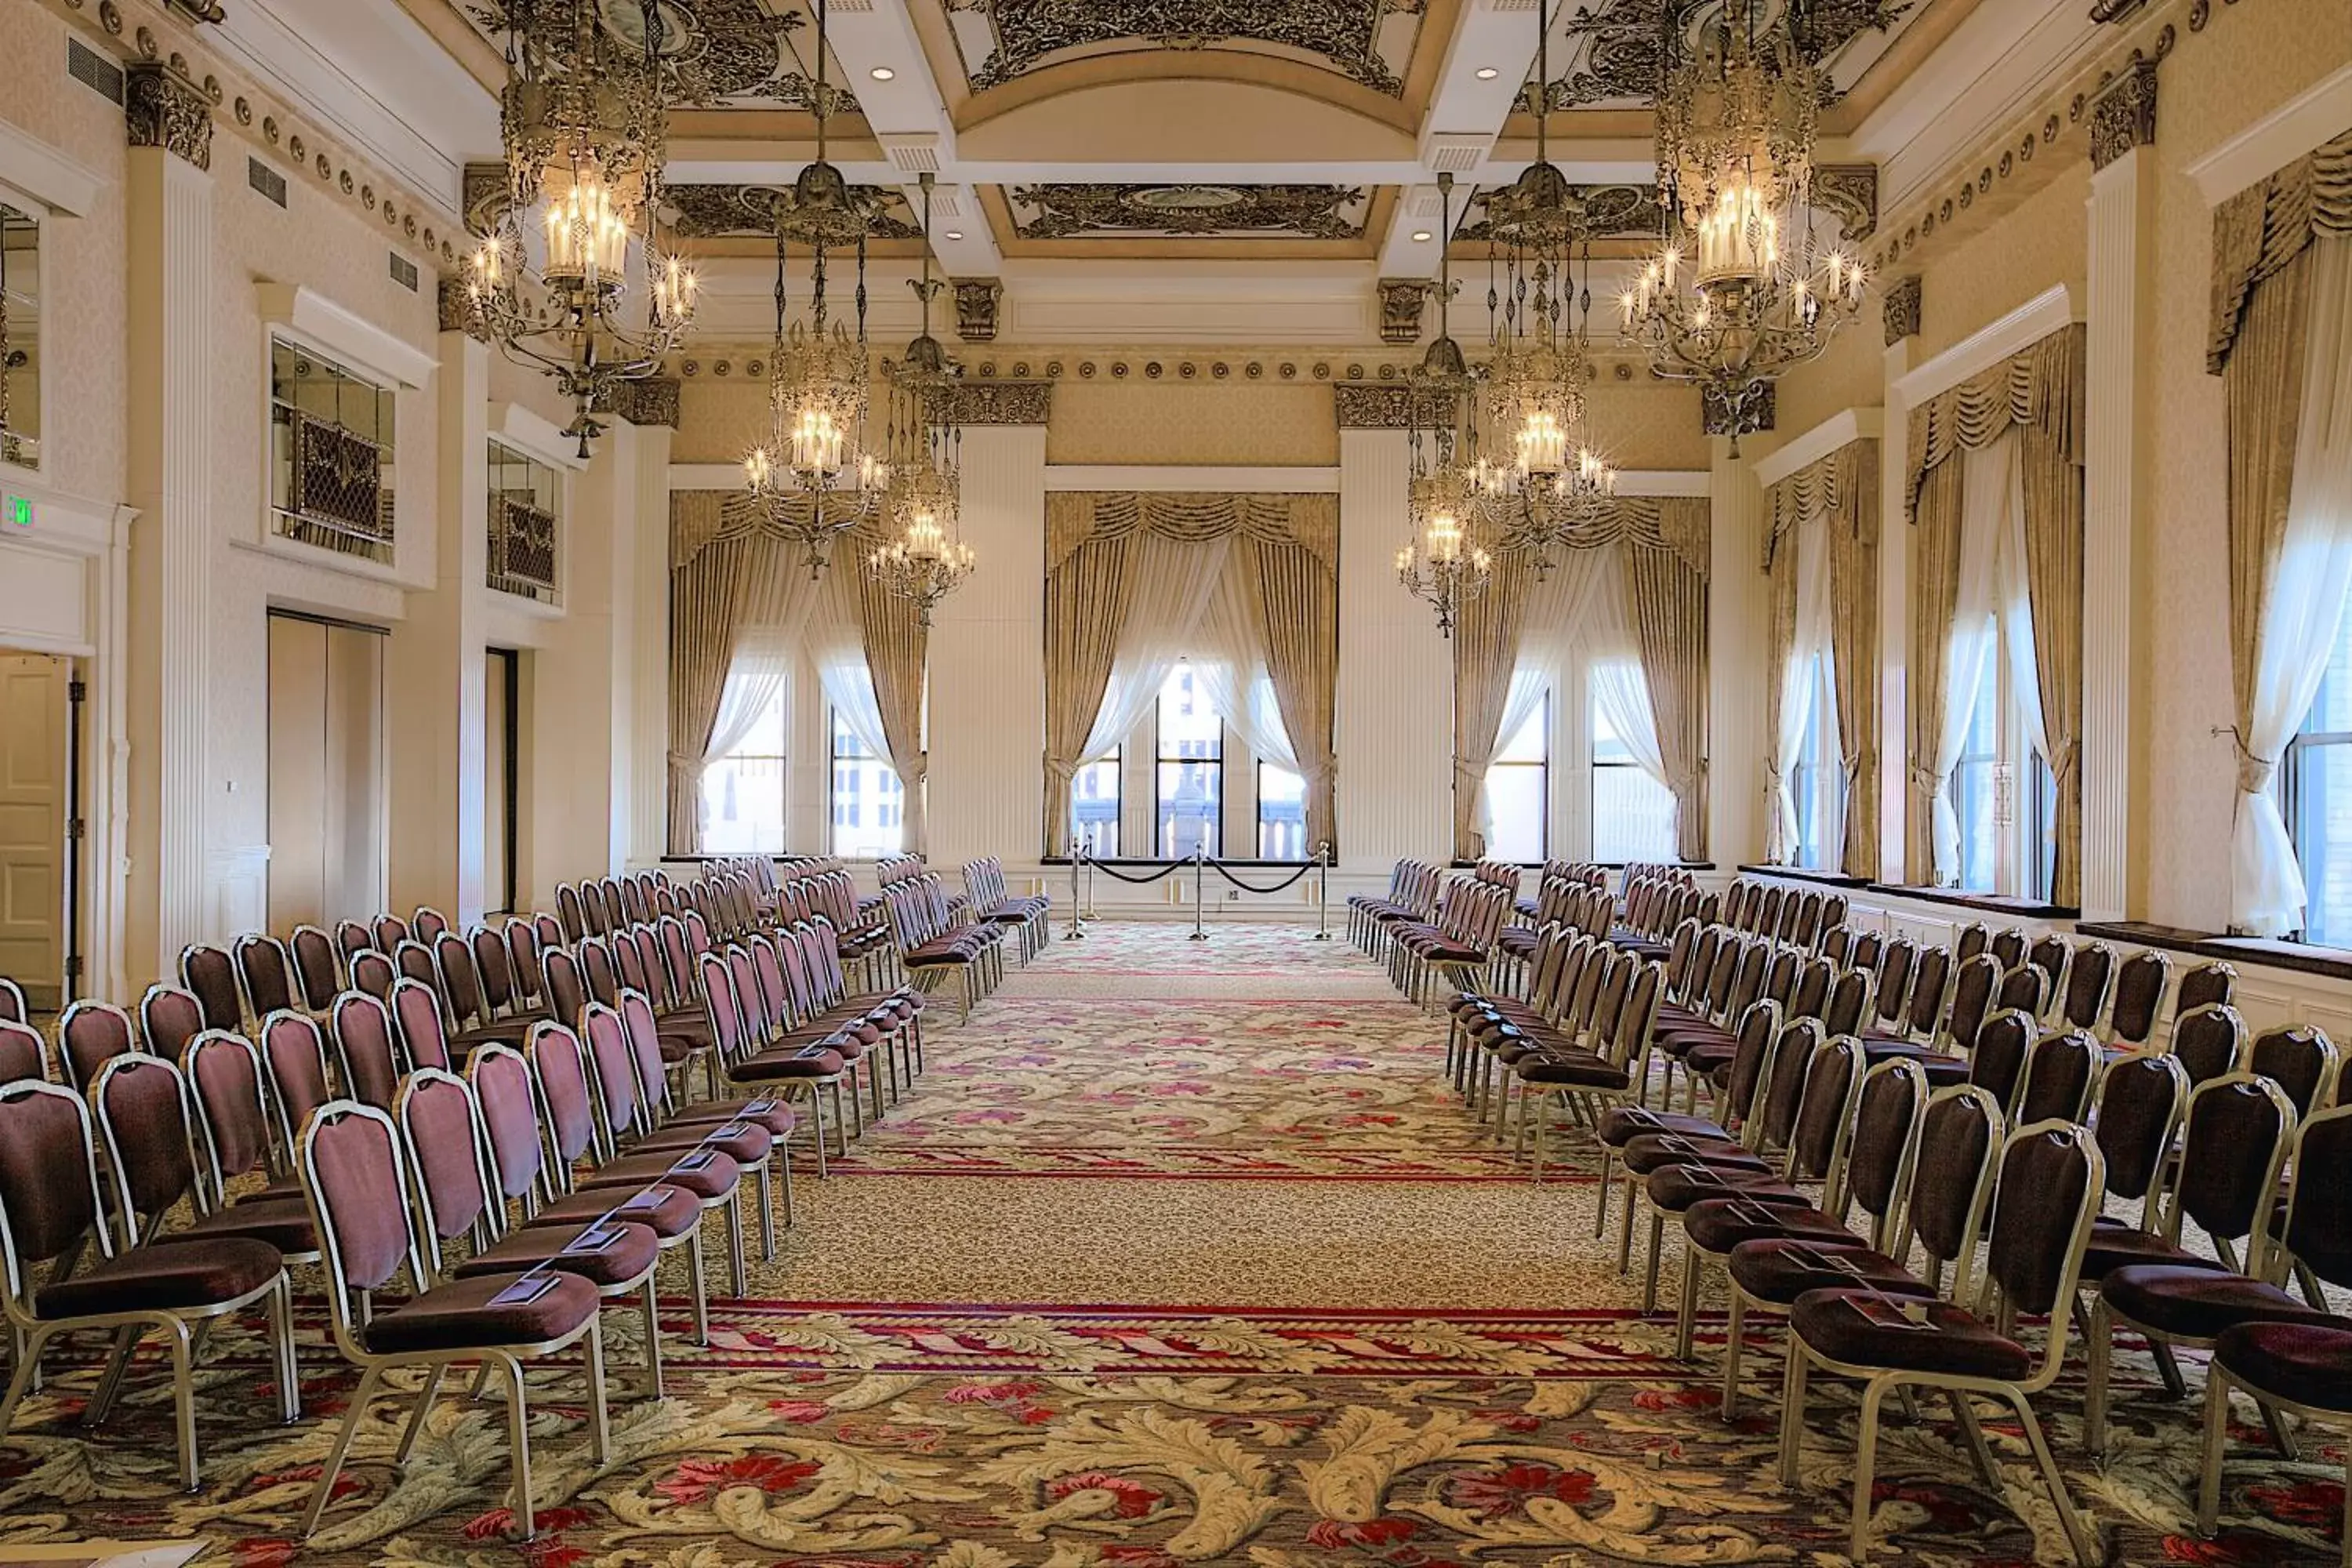 Banquet/Function facilities, Banquet Facilities in The Pfister Hotel